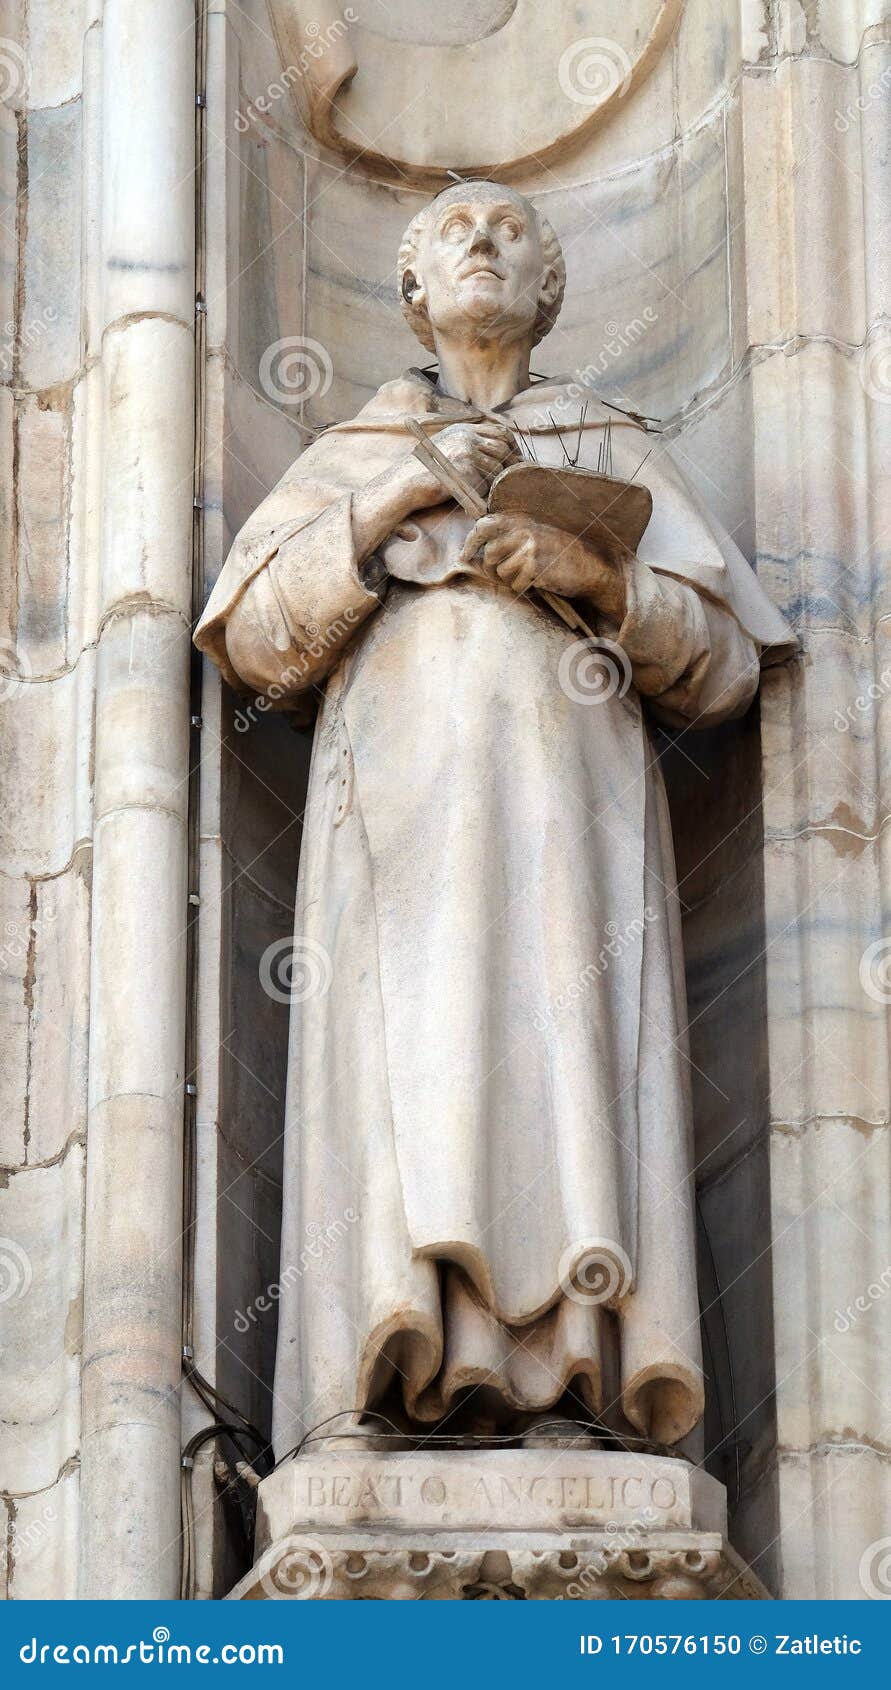 blessed fra angelico, statue on the milan cathedral